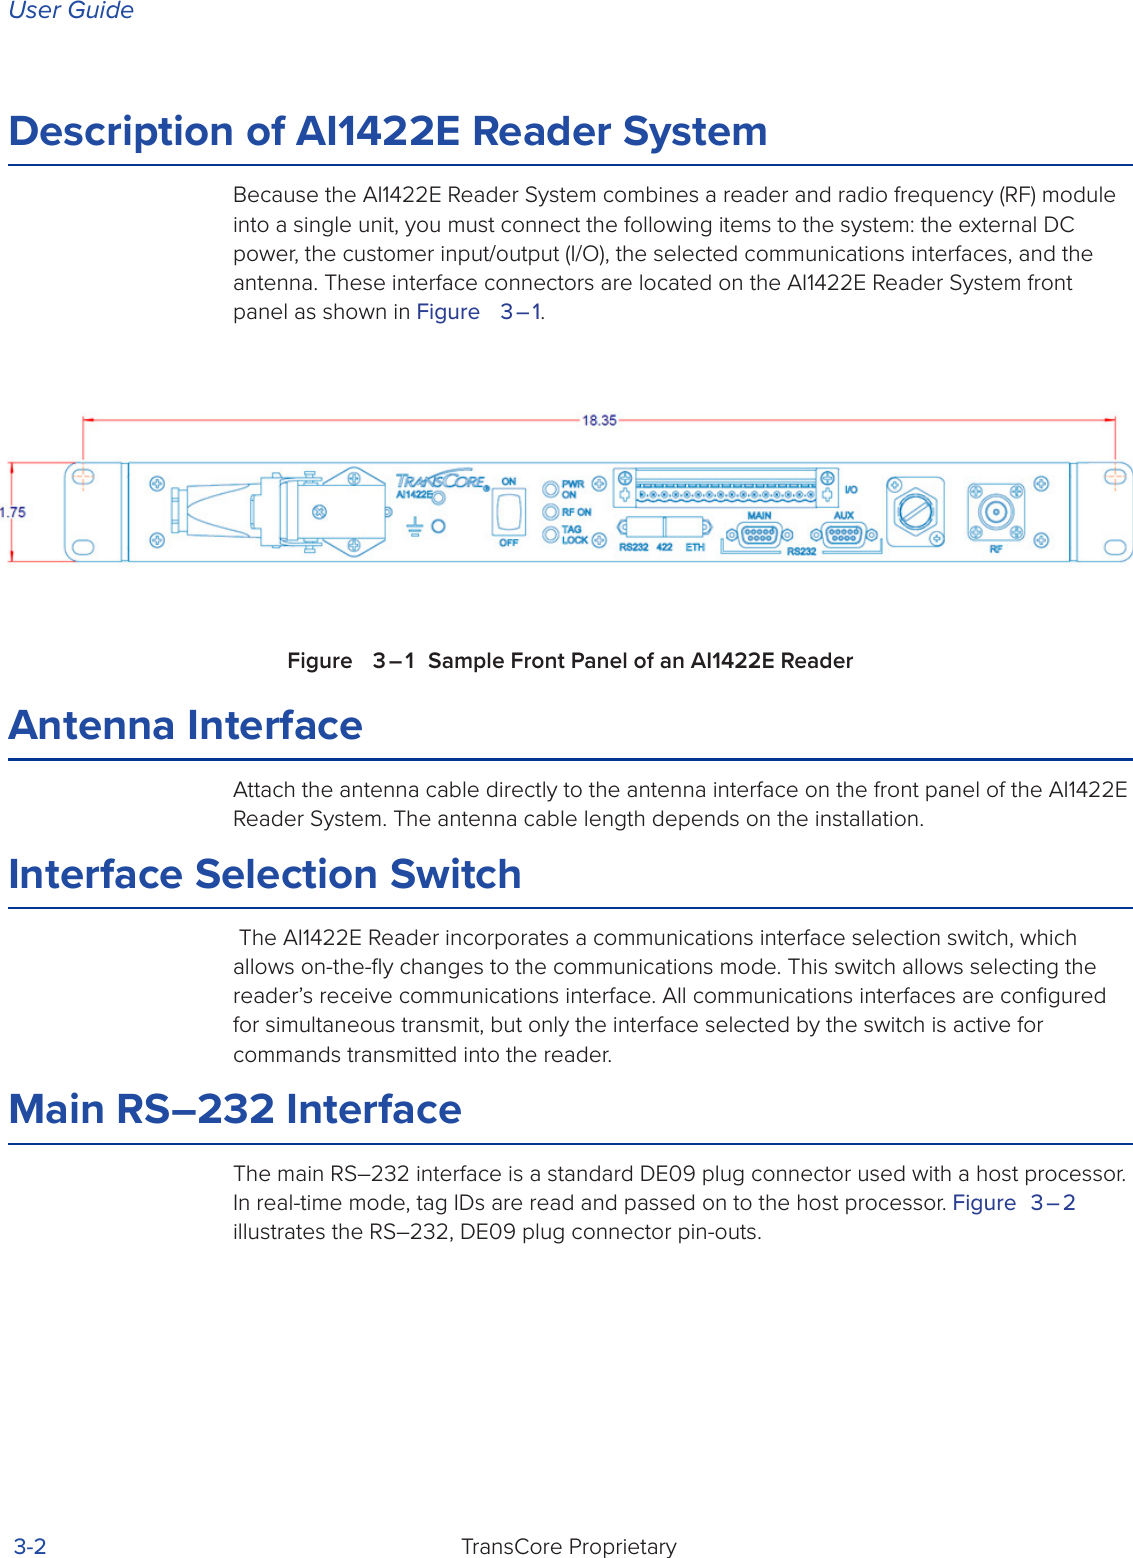 User GuideTransCore Proprietary 3-2Description of AI1422E Reader SystemBecause the AI1422E Reader System combines a reader and radio frequency (RF) module into a single unit, you must connect the following items to the system: the external DC power, the customer input/output (I/O), the selected communications interfaces, and the antenna. These interface connectors are located on the AI1422E Reader System front panel as shown in Figure   3 – 1.Figure   3 – 1  Sample Front Panel of an AI1422E ReaderAntenna InterfaceAttach the antenna cable directly to the antenna interface on the front panel of the AI1422E Reader System. The antenna cable length depends on the installation.Interface Selection Switch The AI1422E Reader incorporates a communications interface selection switch, which allows on-the-ﬂy changes to the communications mode. This switch allows selecting the reader’s receive communications interface. All communications interfaces are conﬁgured for simultaneous transmit, but only the interface selected by the switch is active for commands transmitted into the reader.Main RS–232 InterfaceThe main RS–232 interface is a standard DE09 plug connector used with a host processor. In real-time mode, tag IDs are read and passed on to the host processor. Figure 3 – 2 illustrates the RS–232, DE09 plug connector pin-outs.